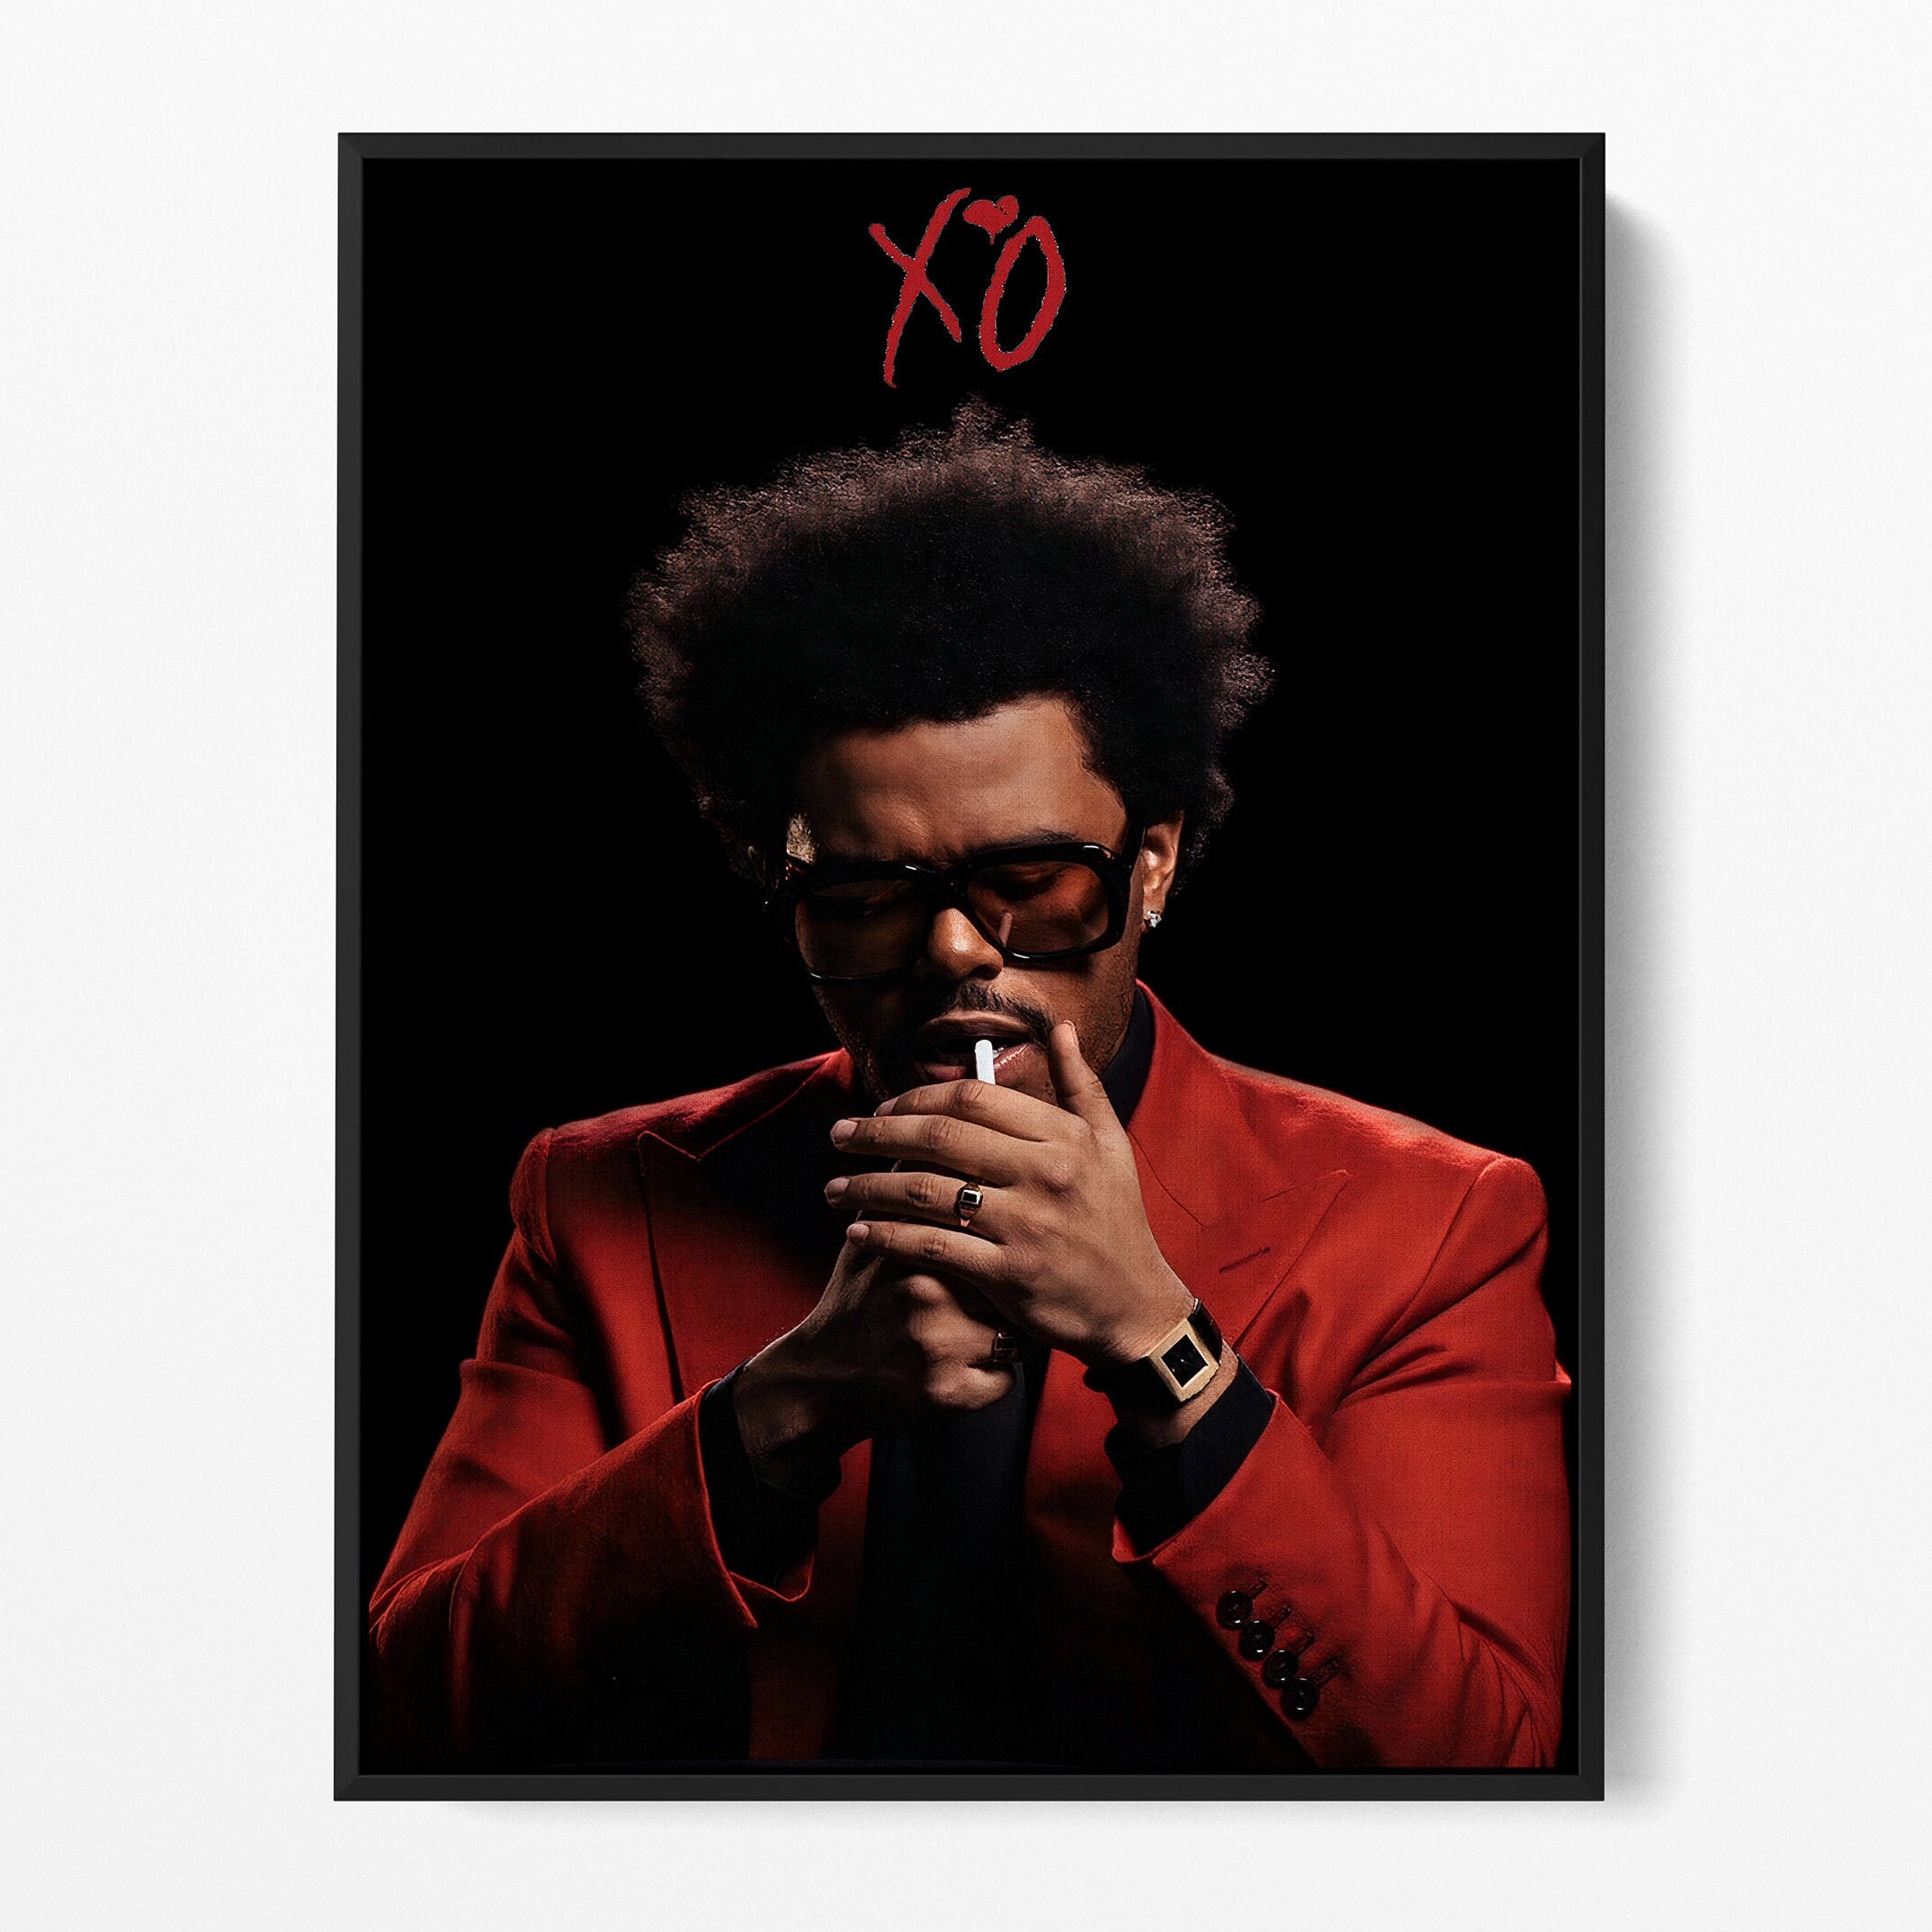 Discover The Weeknd XO, The Weeknd Canvas Wall Art, XO Canvas Wall Art, Music Canvas Wall Art